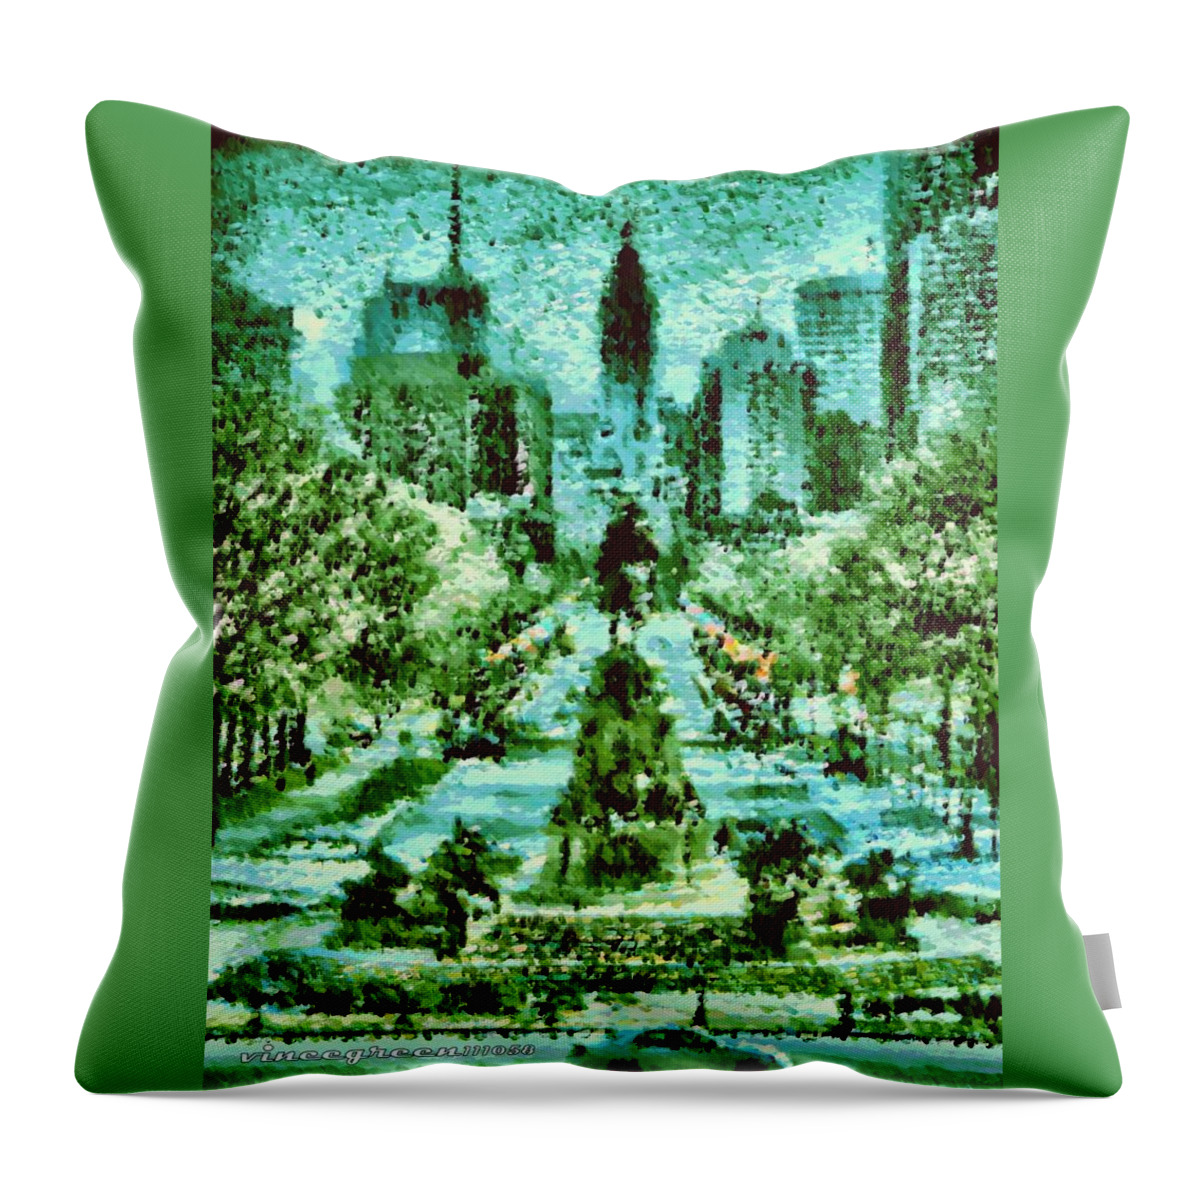 Philadelphia Throw Pillow featuring the digital art Rocky's View by Vincent Green